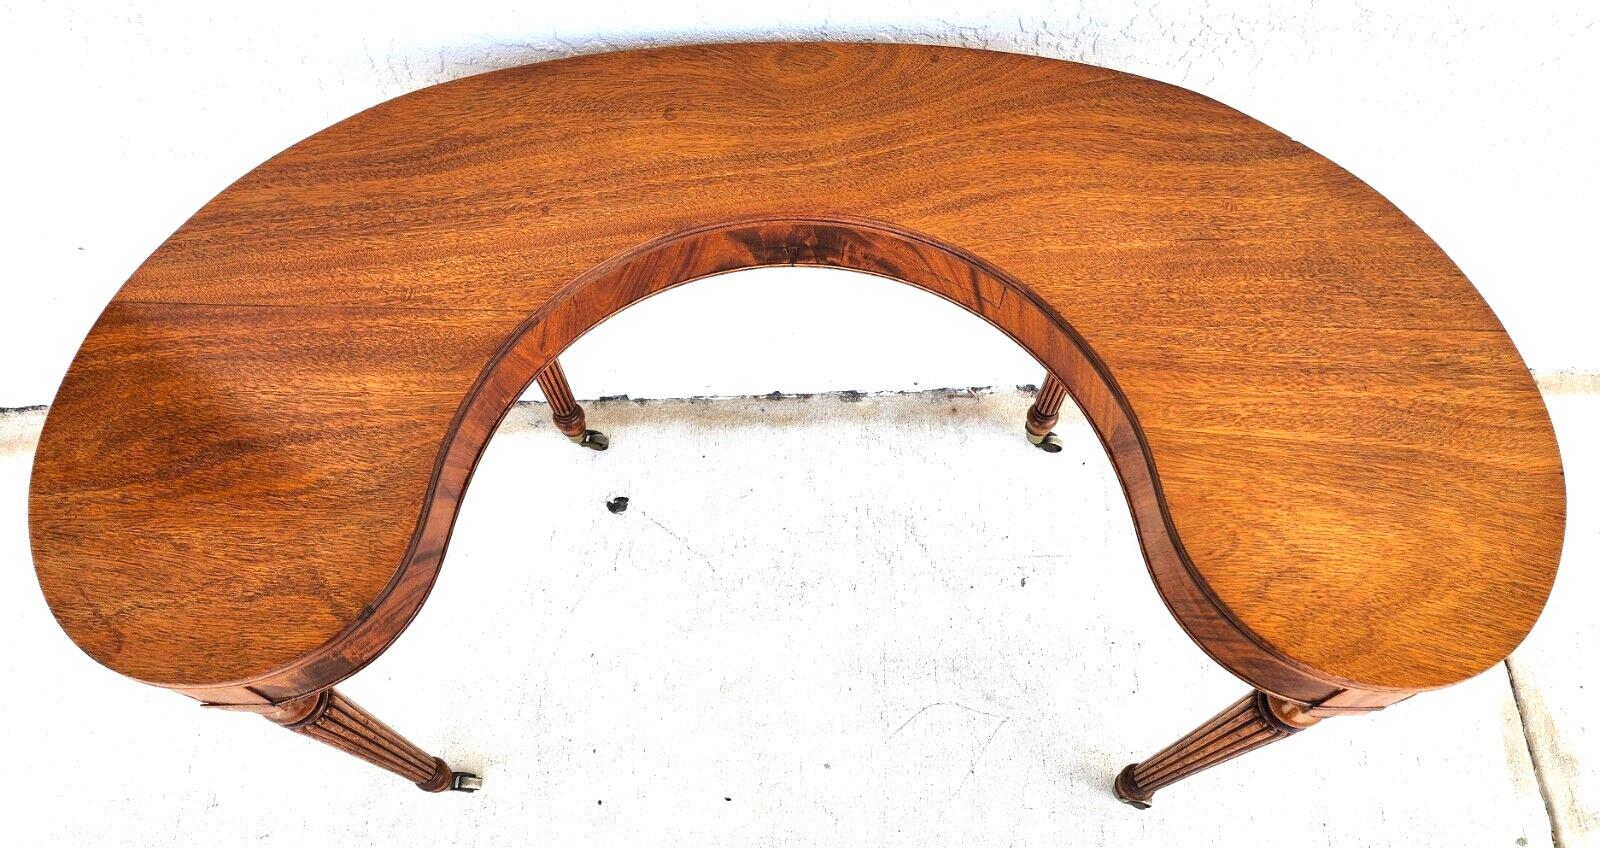 For FULL item description click on CONTINUE READING at the bottom of this page.

Offering One Of Our Recent Palm Beach Estate Fine Furniture Acquisitions Of A 
Mid-Century Kidney Horseshoe Shaped Wood Console Table or Writing Desk 

Approximate